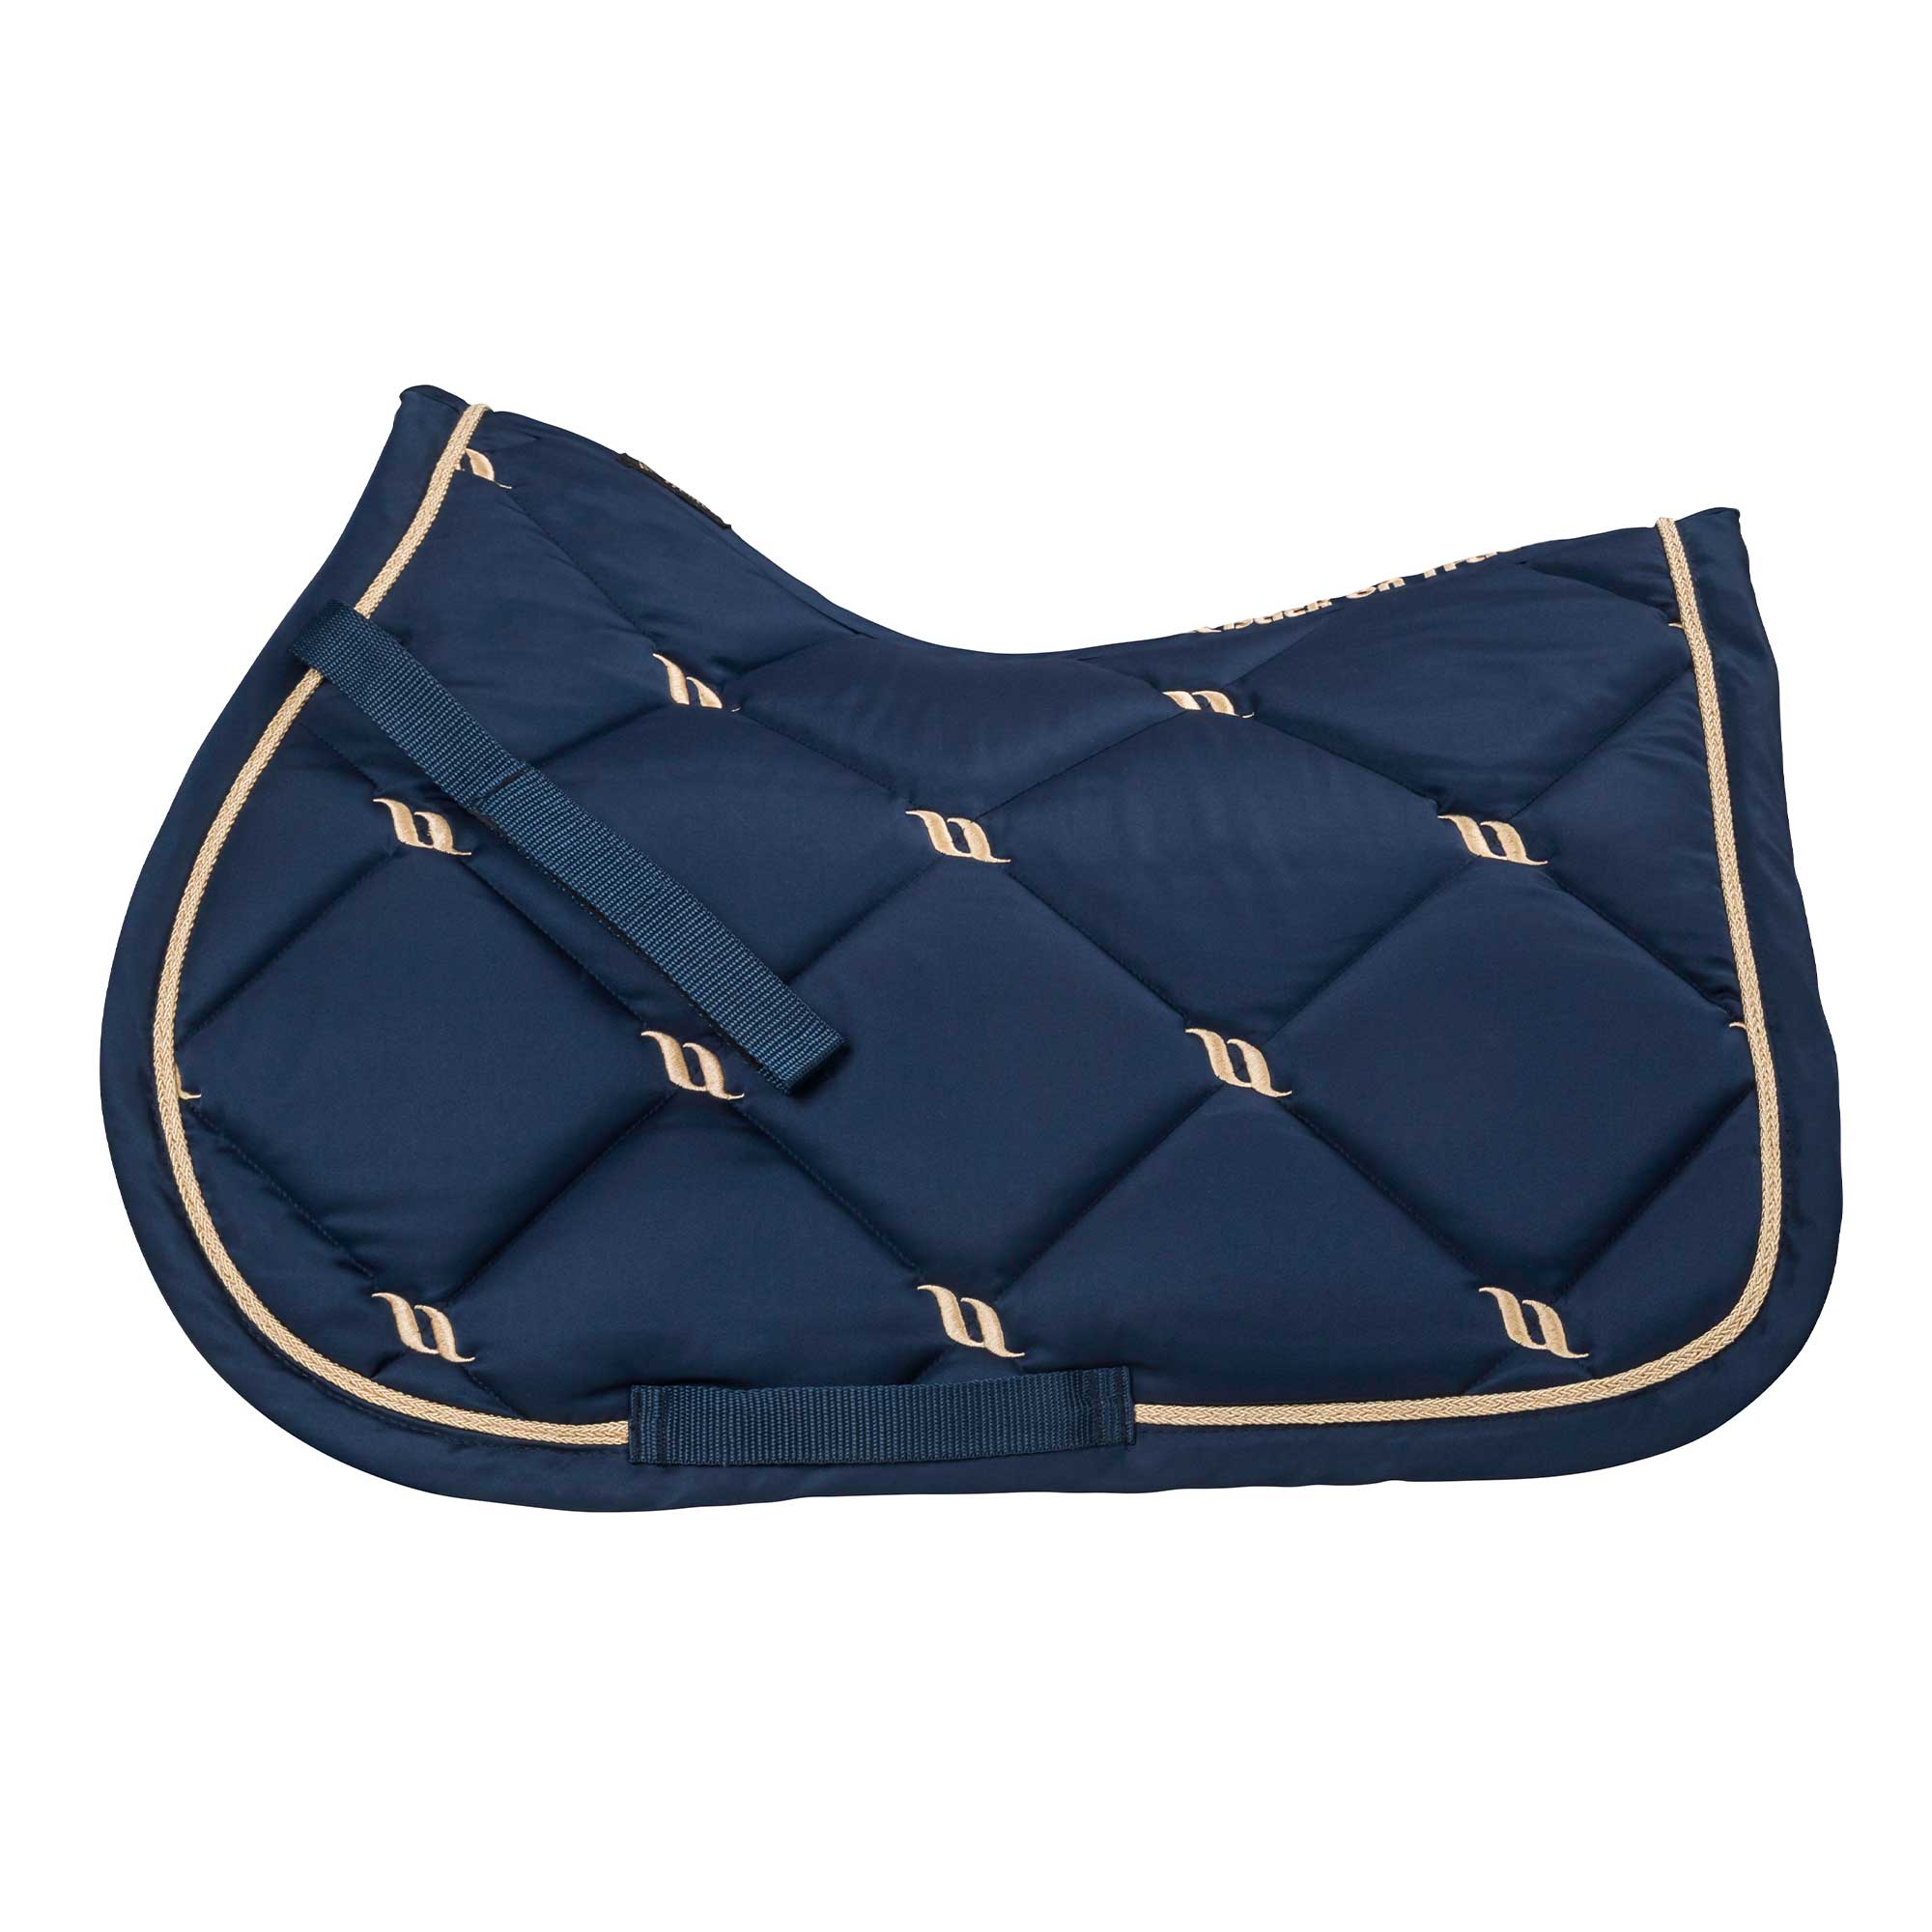 "Nights Collection" Saddle Pad Jumping Noble Blue - Full